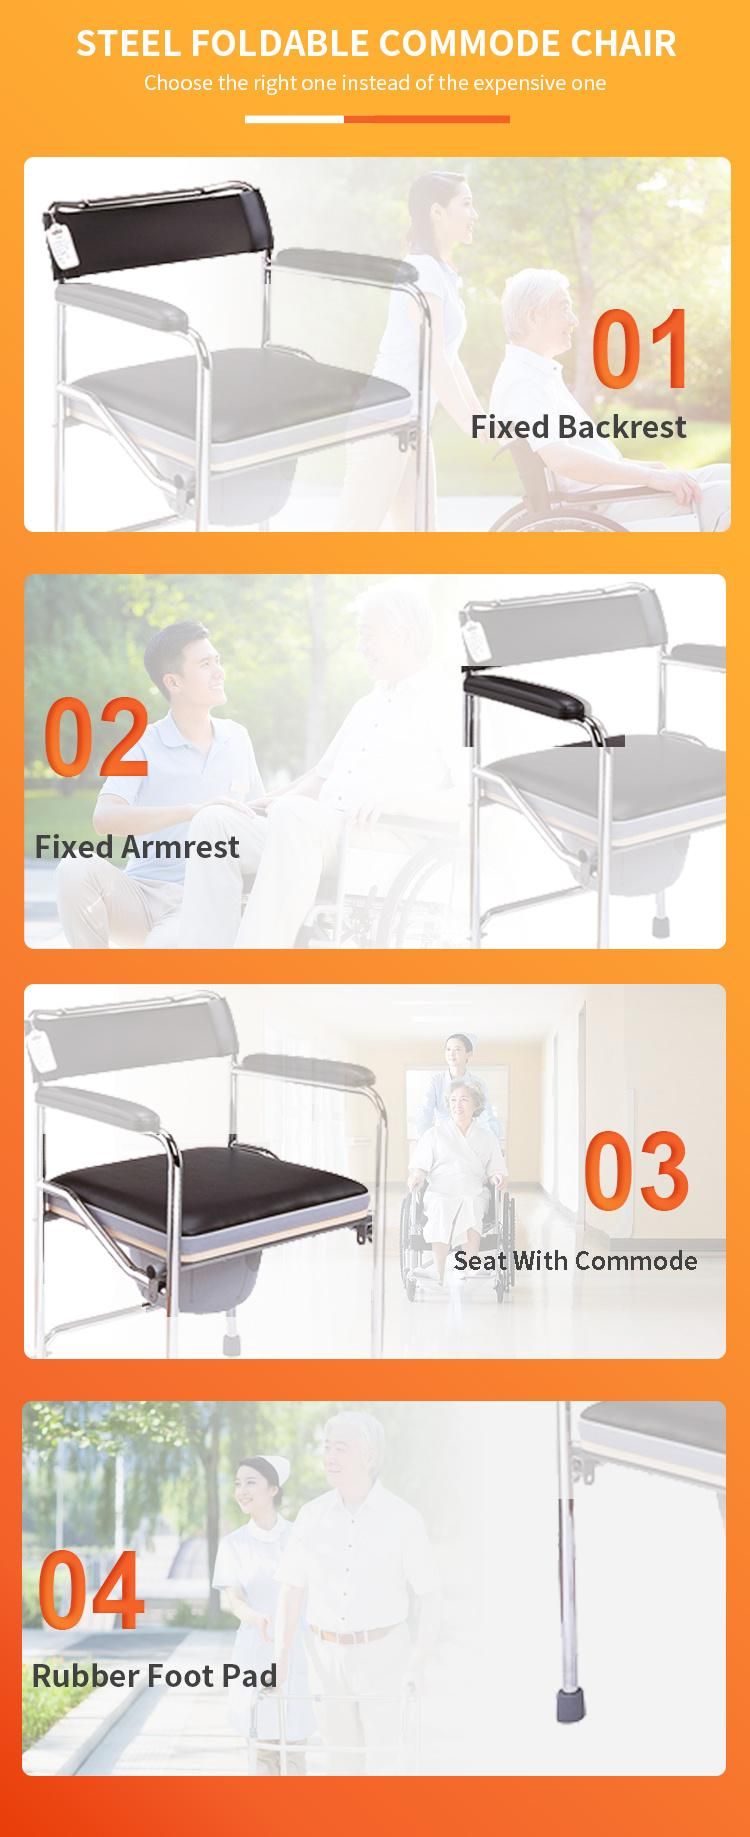 Easy Carry Hot Selling Can Fold Chrome Cover Frame Have Backrest and Armrest Steel Commode Chair PVC Soft Cushion Rehabilitation Medical Equipment